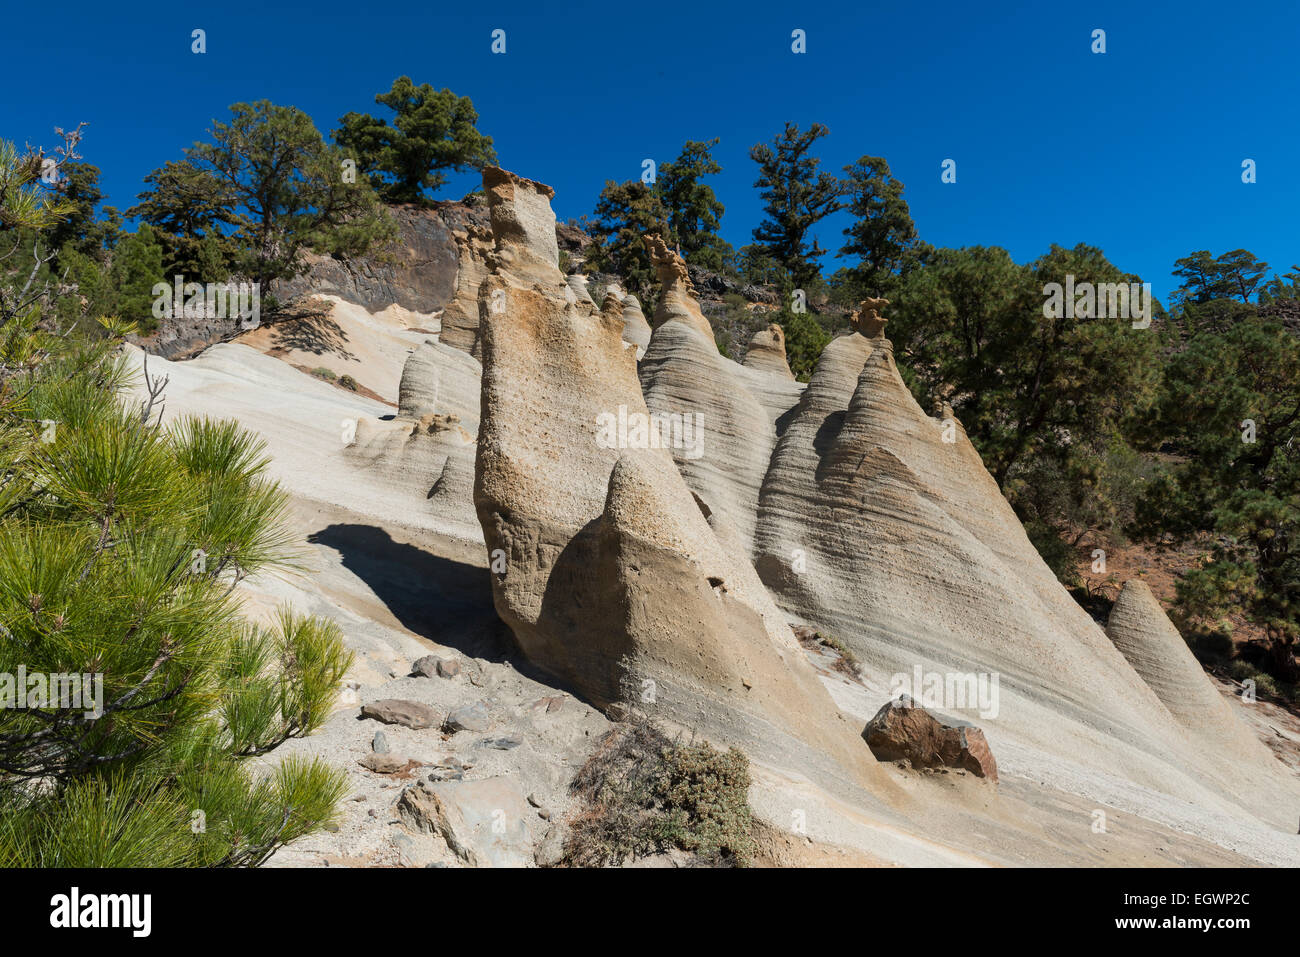 Paisaje Lunar on the Canary island of Tenerife with great erosion. Stock Photo